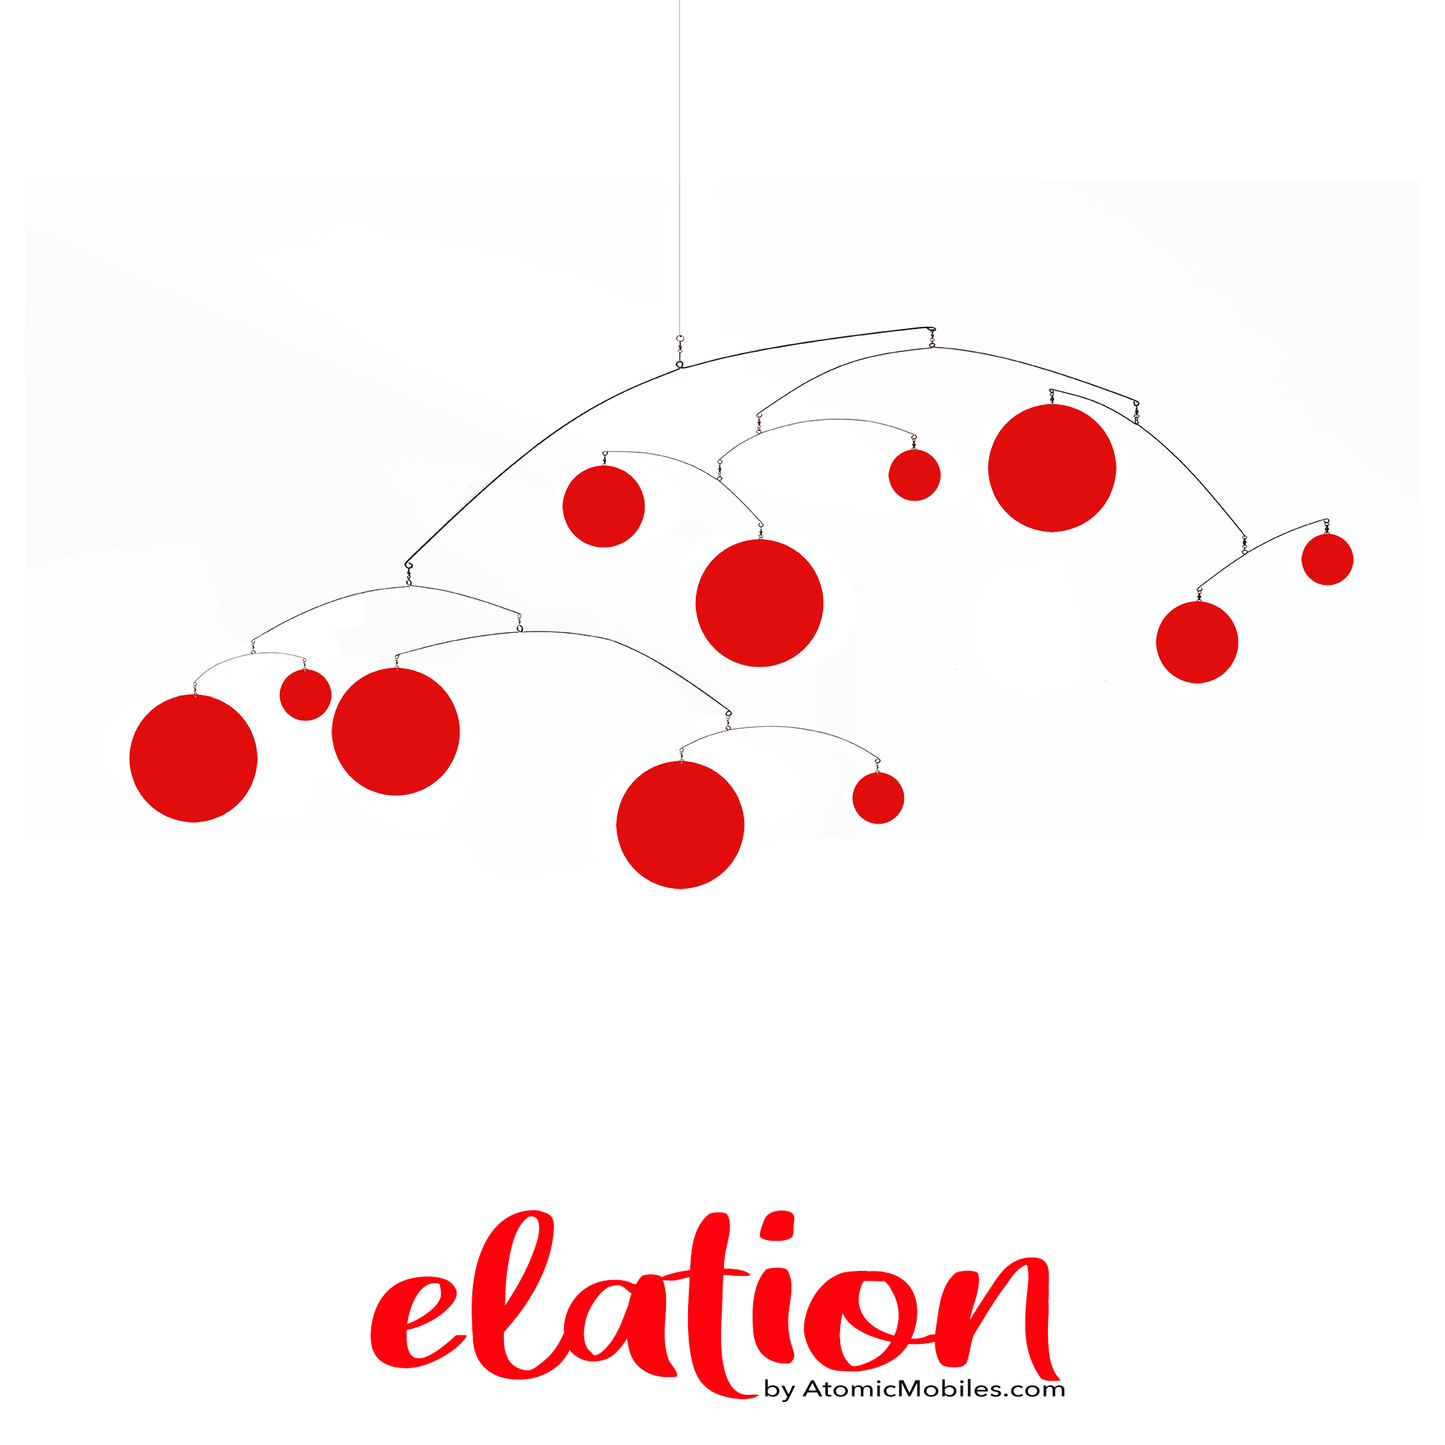 Elation XL kinetic hanging art mobile - 96x48 large size - mid century modern style hanging mobile in red by AtomicMobiles.com